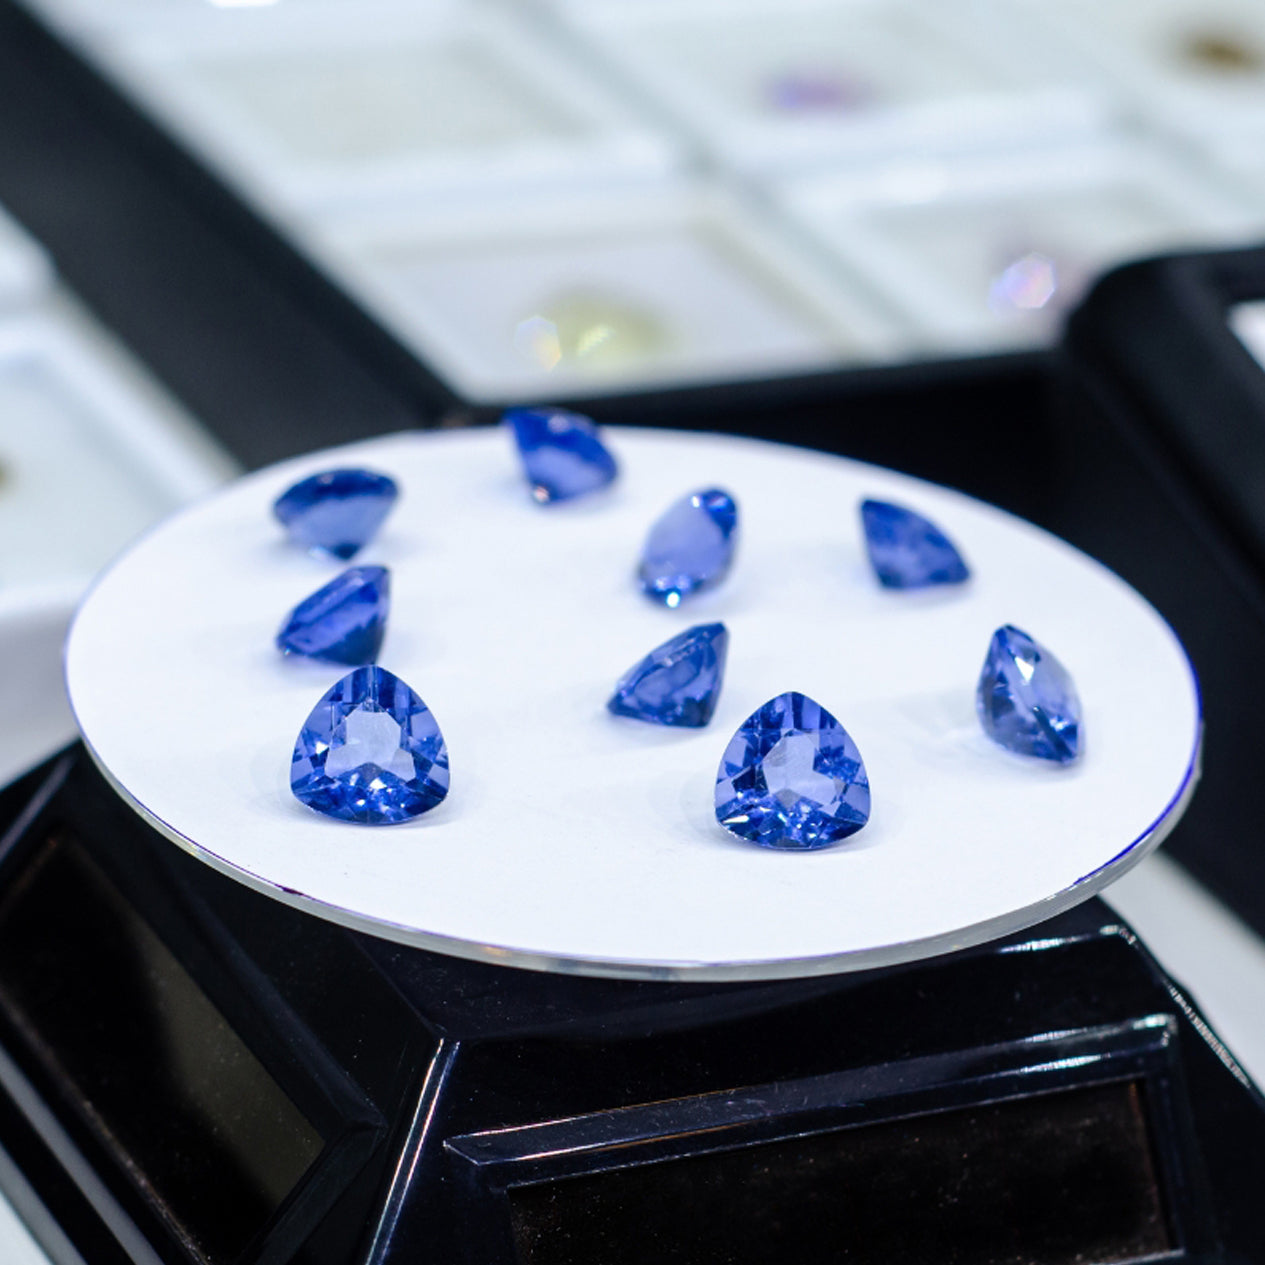 Shimansky Cut and Polished Tanzanite gems on a scale